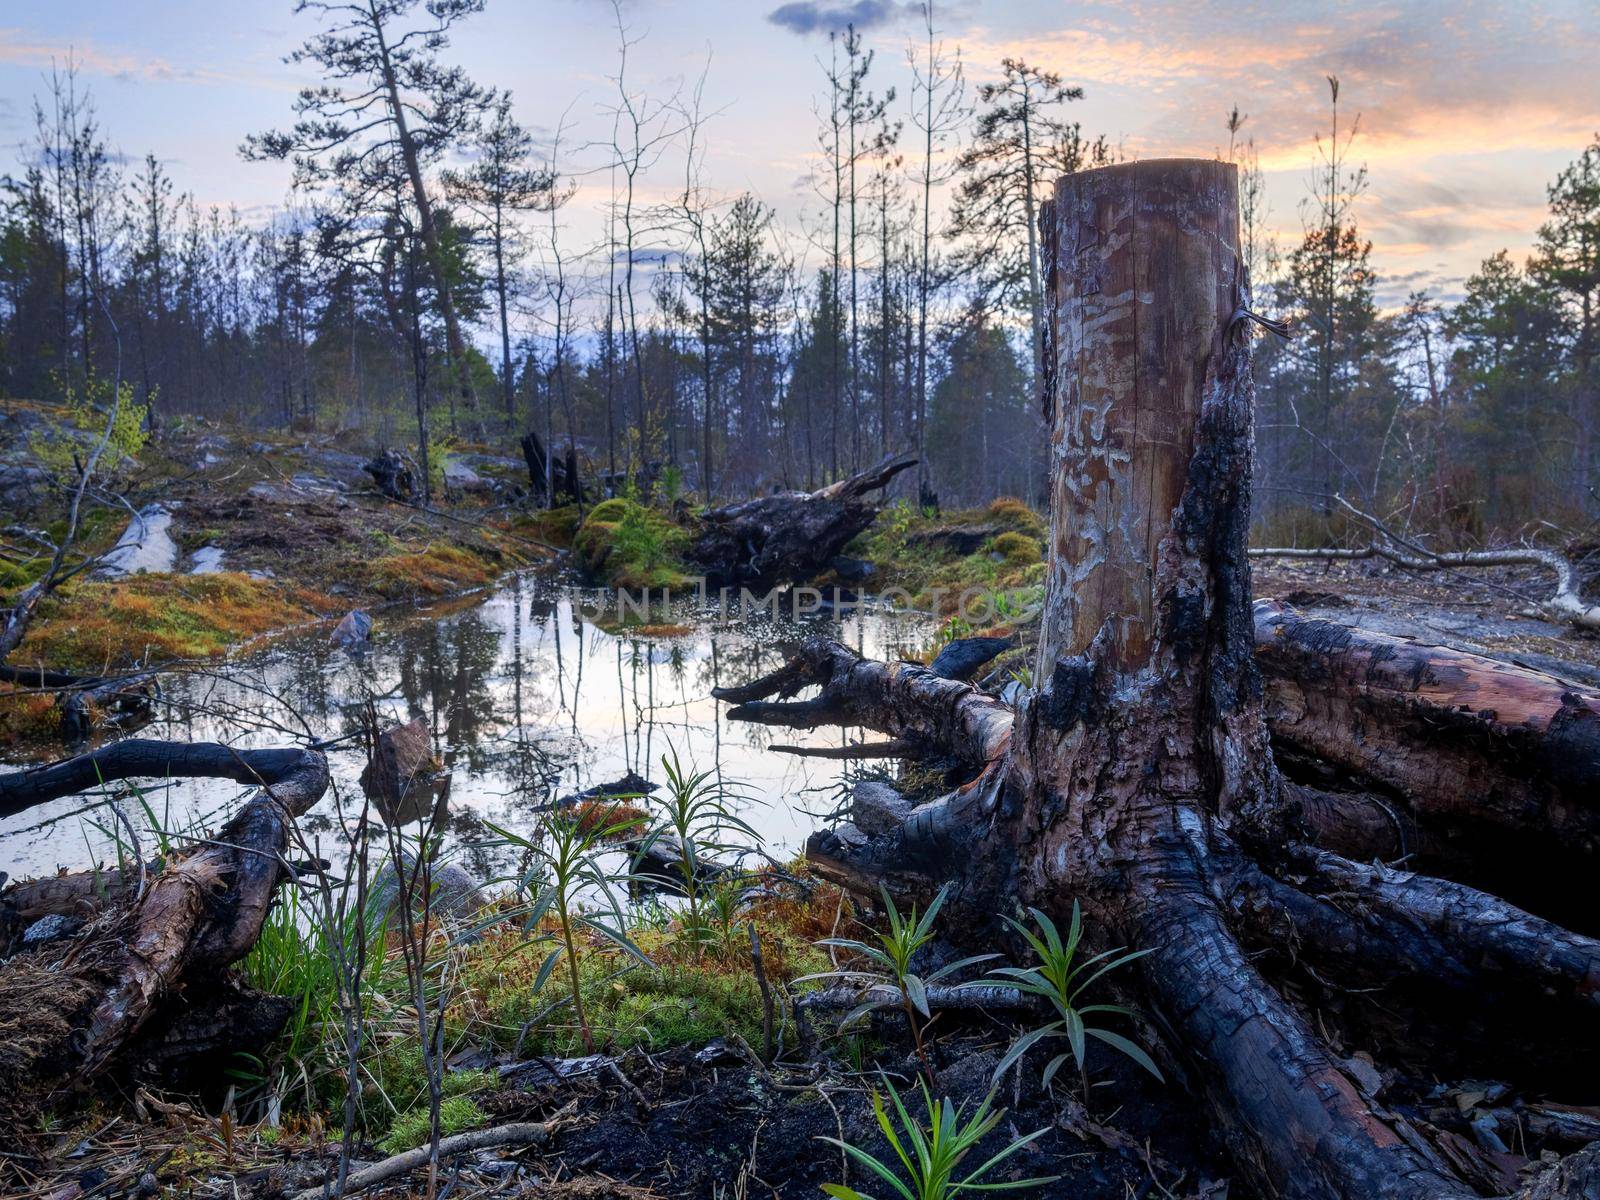 Landscape of the Karelian forest. Two stumps by a small lake in the forest on a rocky massif